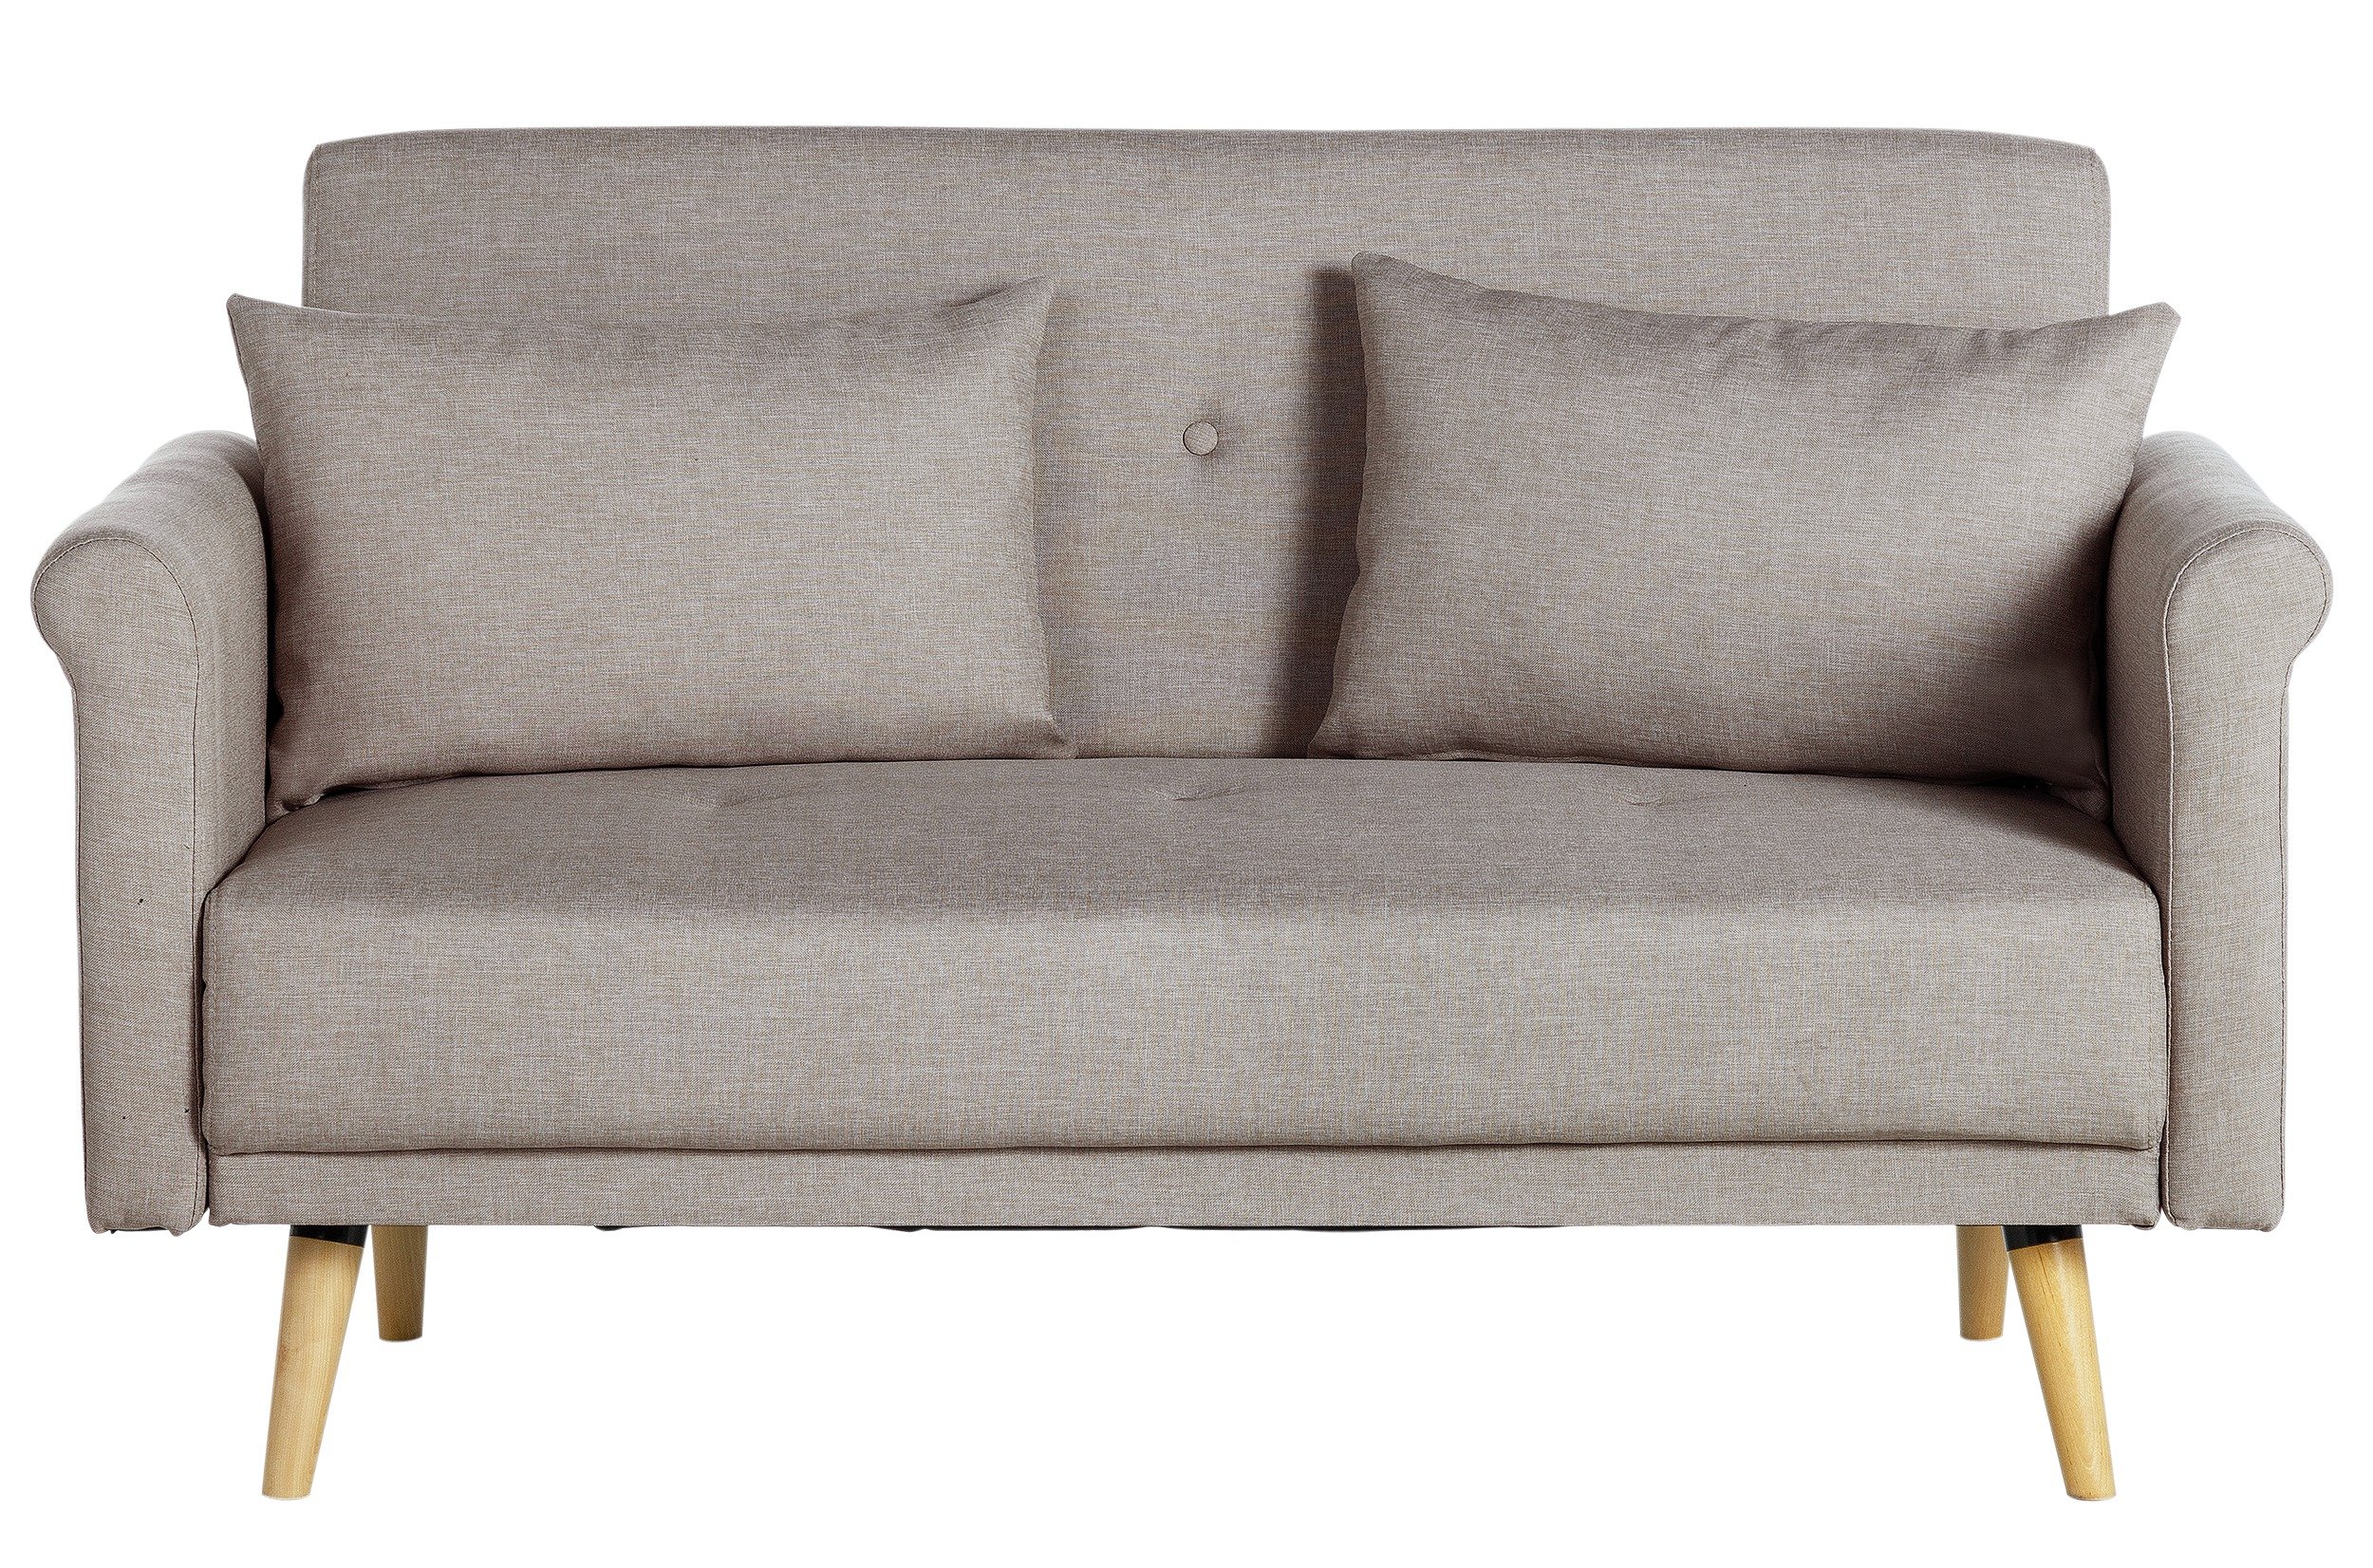 evie 2 seater sofa bed